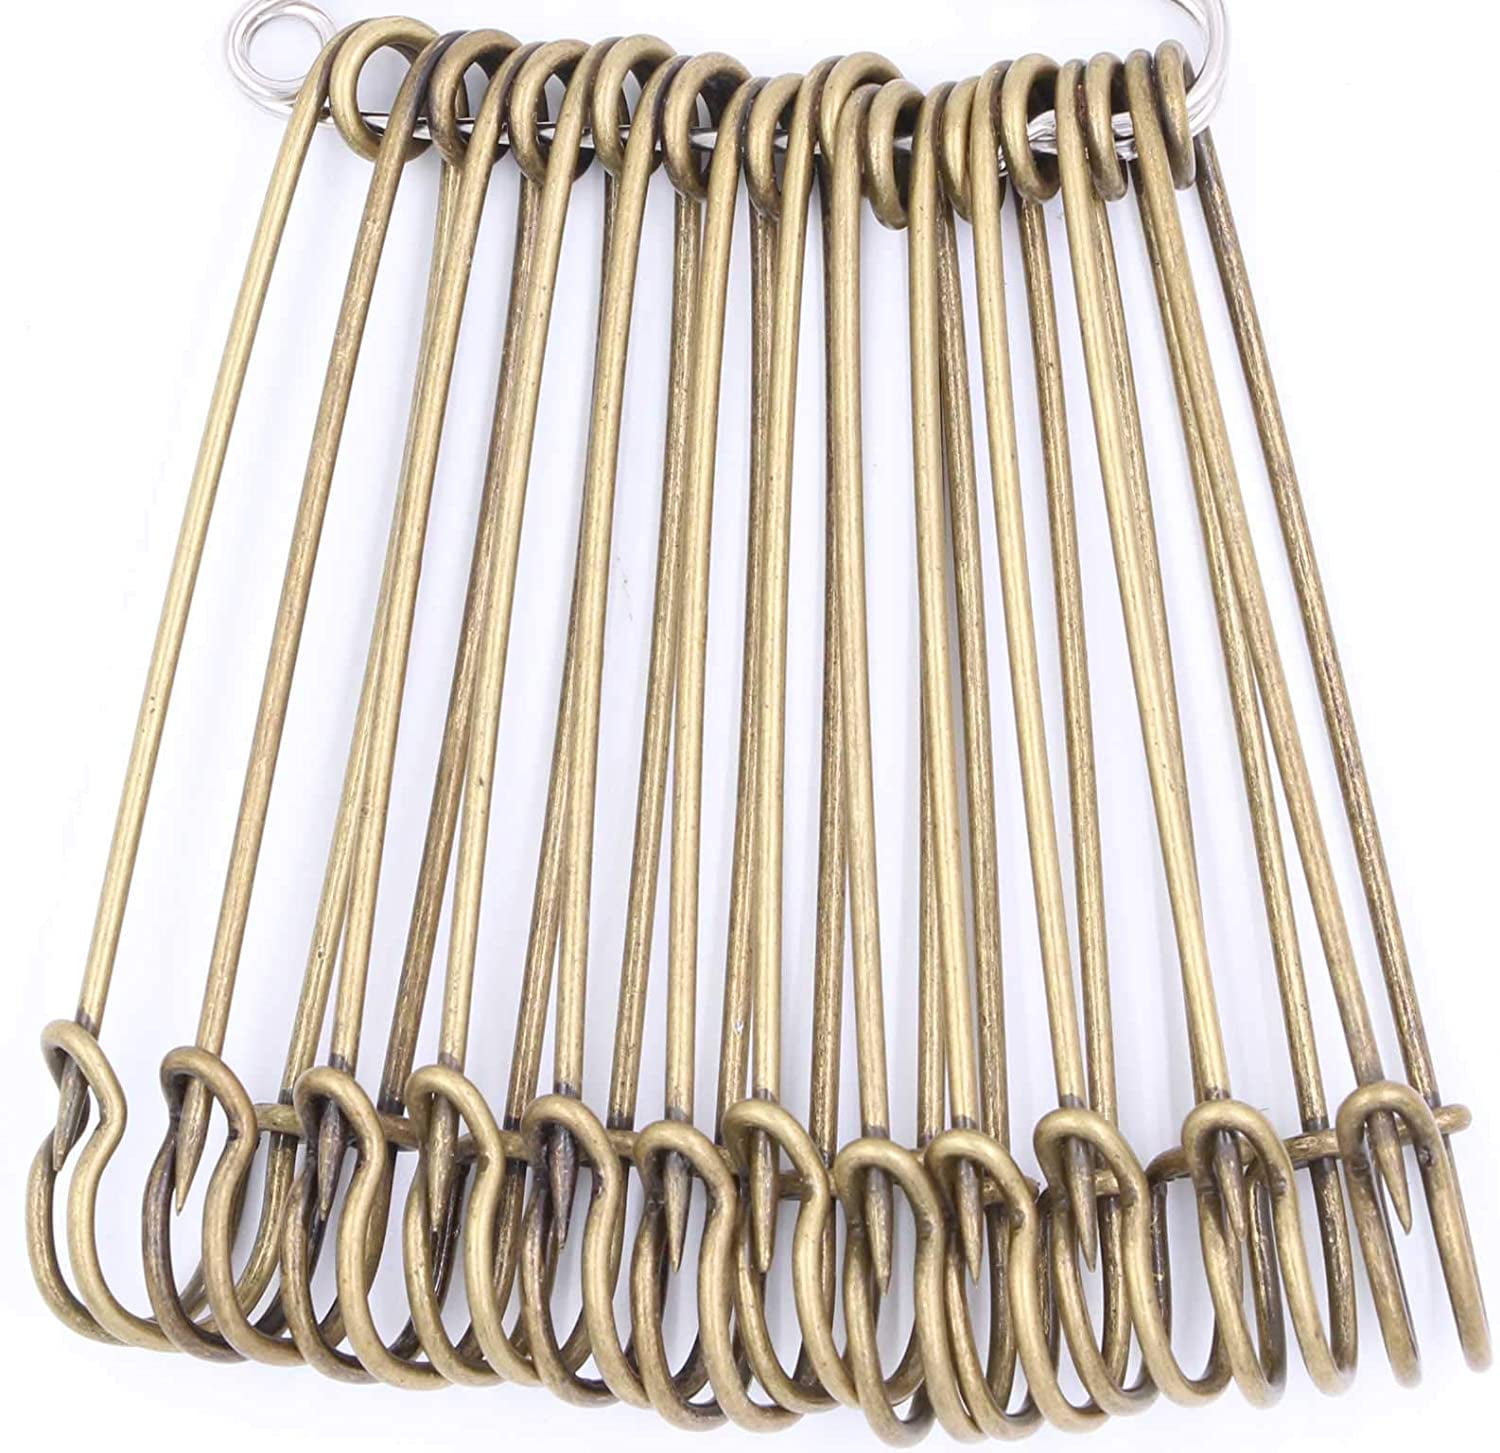  Outus 30 Pieces Extra Large Safety Pins Stainless Steel Heavy  Duty Safety Pins for Blankets, Skirts, Kilts (4 Inch and 3 Inch)